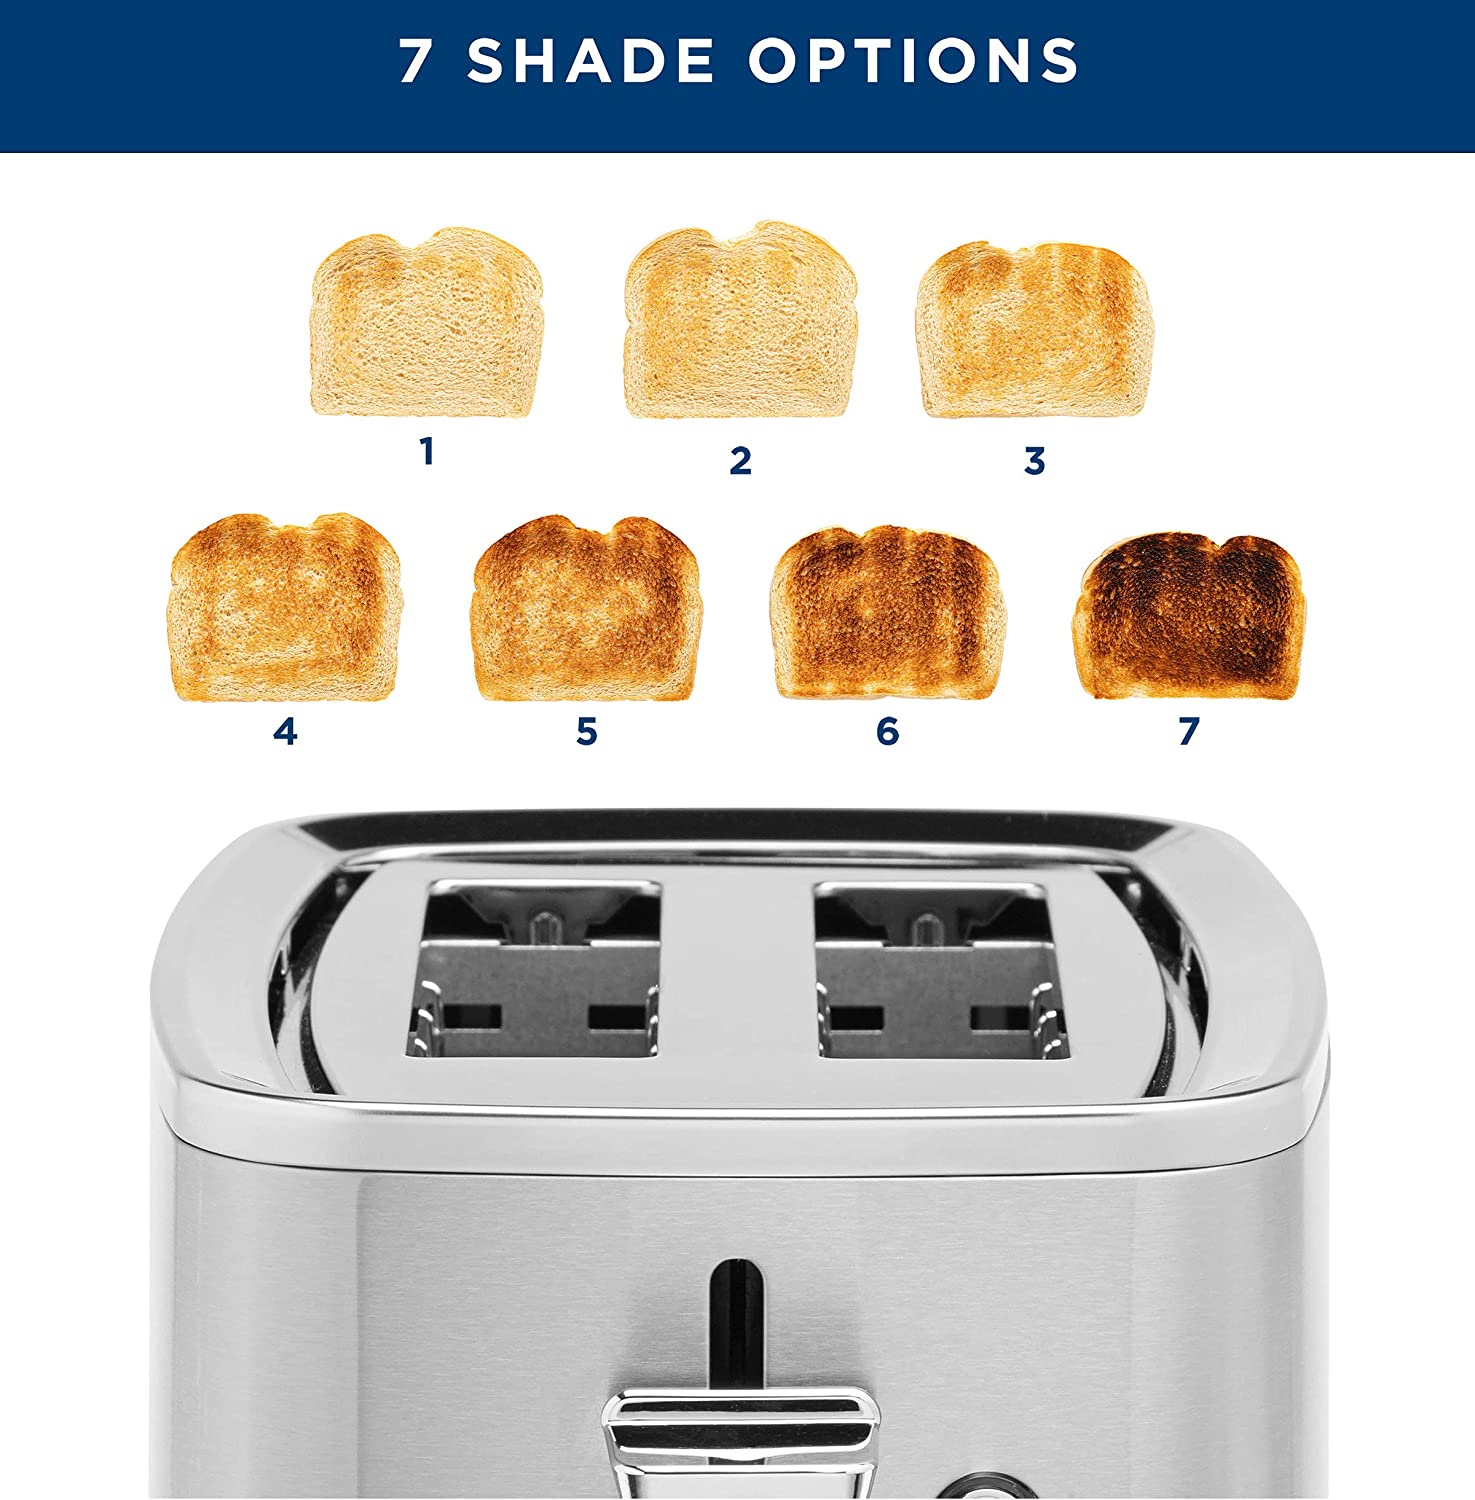 https://bigbigmart.com/wp-content/uploads/2023/05/GE-Stainless-Steel-Toaster-2-Slice-Extra-Wide-Slots-for-Toasting-Bagels-Breads-Waffles-More-7-Shade-Options-for-the-Entire-Household-to-Enjoy-Countertop-Kitchen-Essentials-850-Watts4.jpg